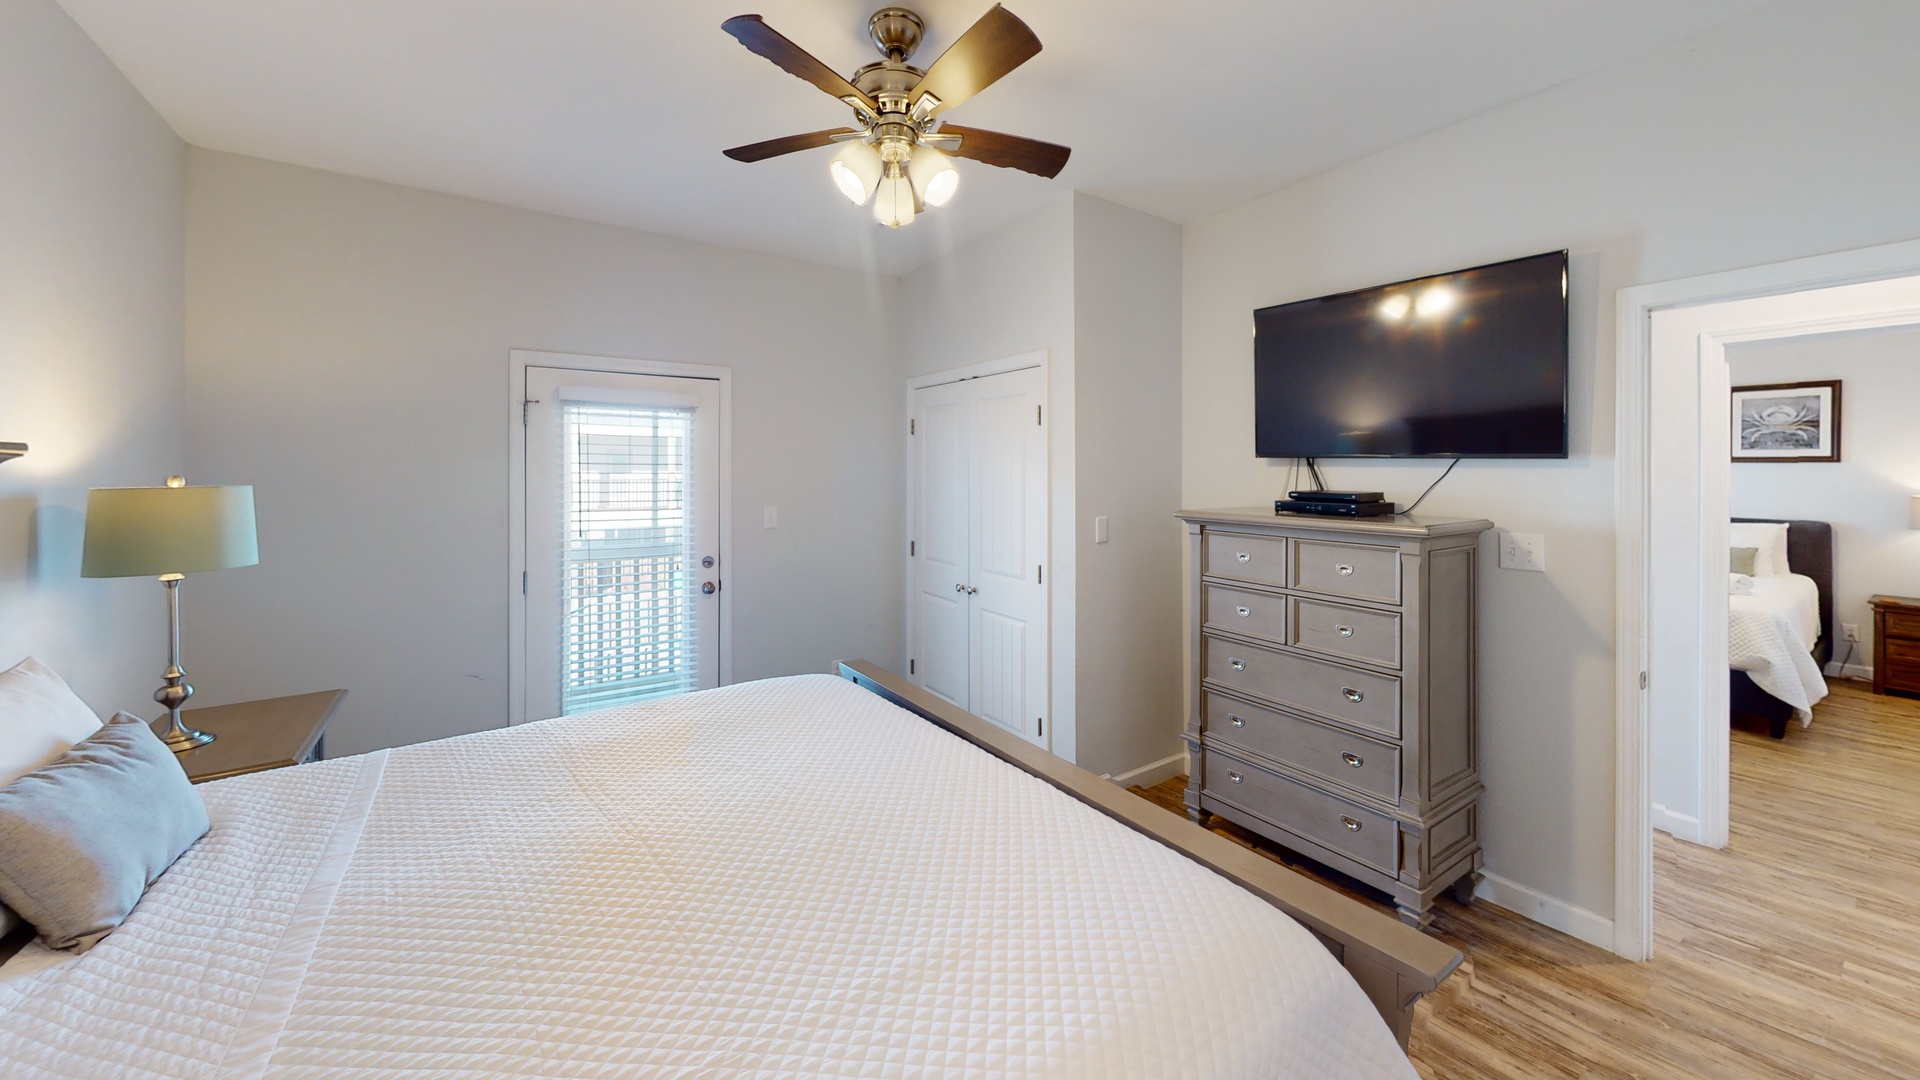 There is access to the screened-in porch, a TV and a private bathroom in the Master bedroom